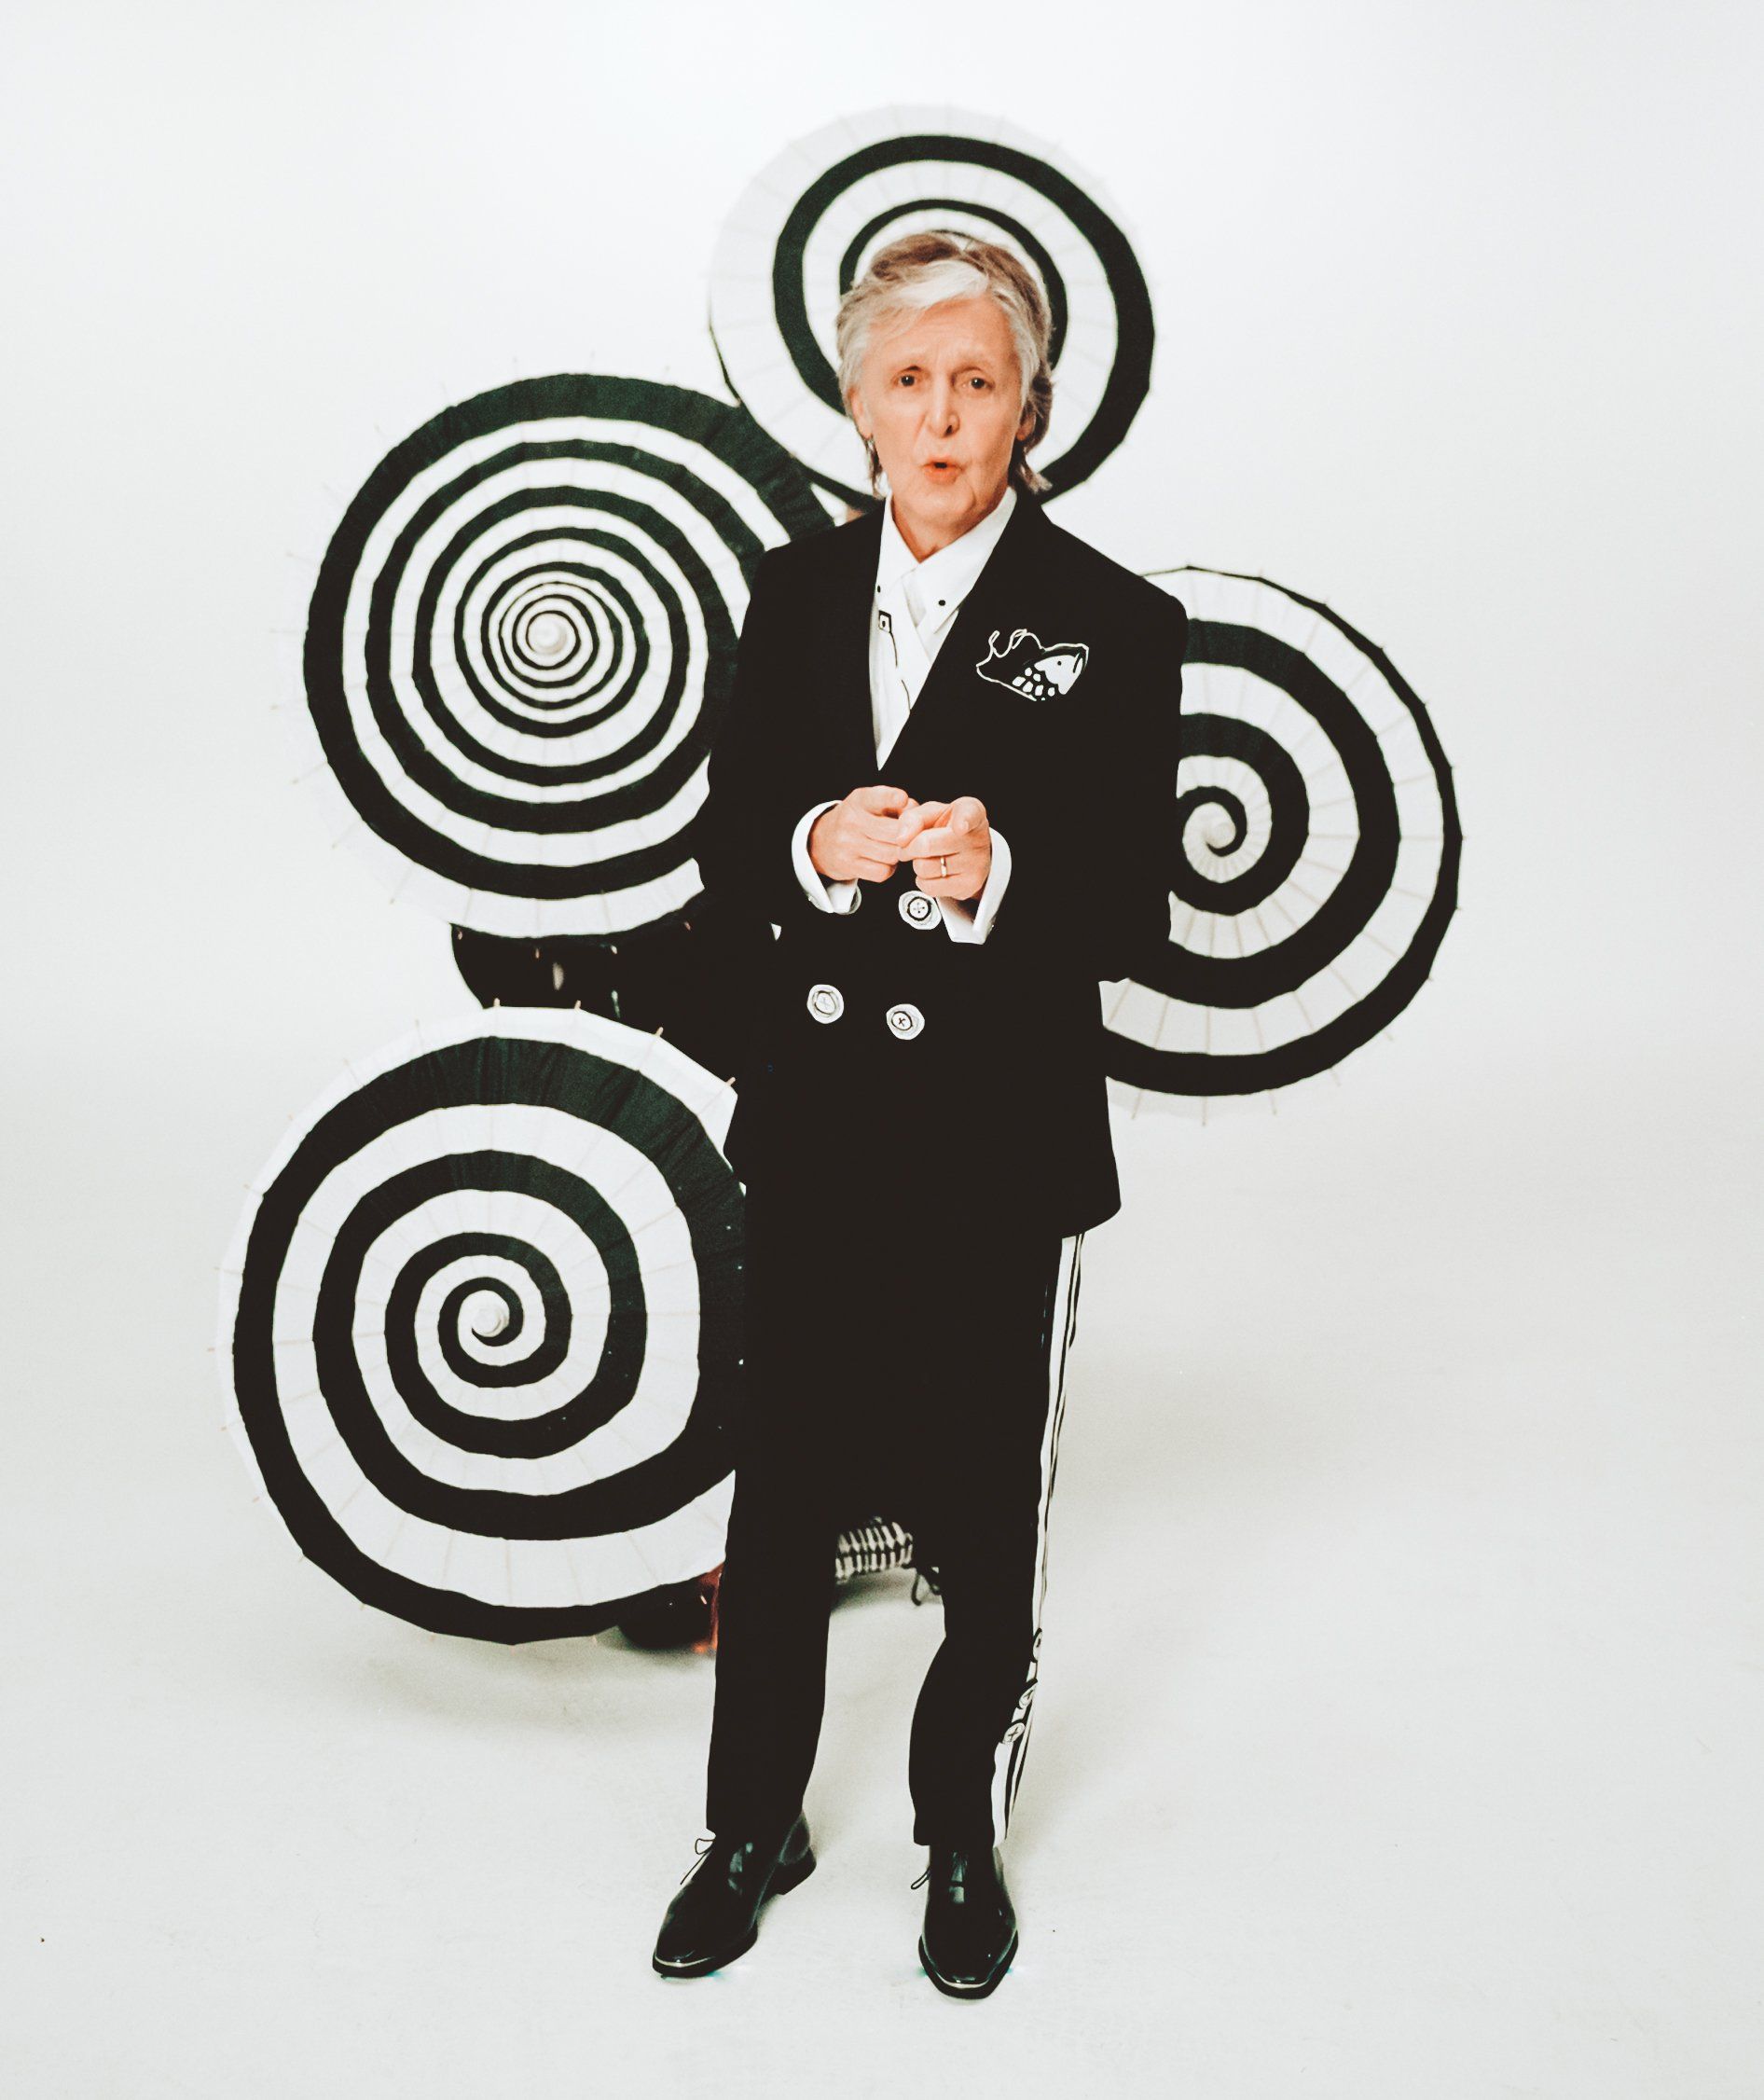 Who Cares I Do Campaign, Paul McCartney standing in front of a black and white swirly statue